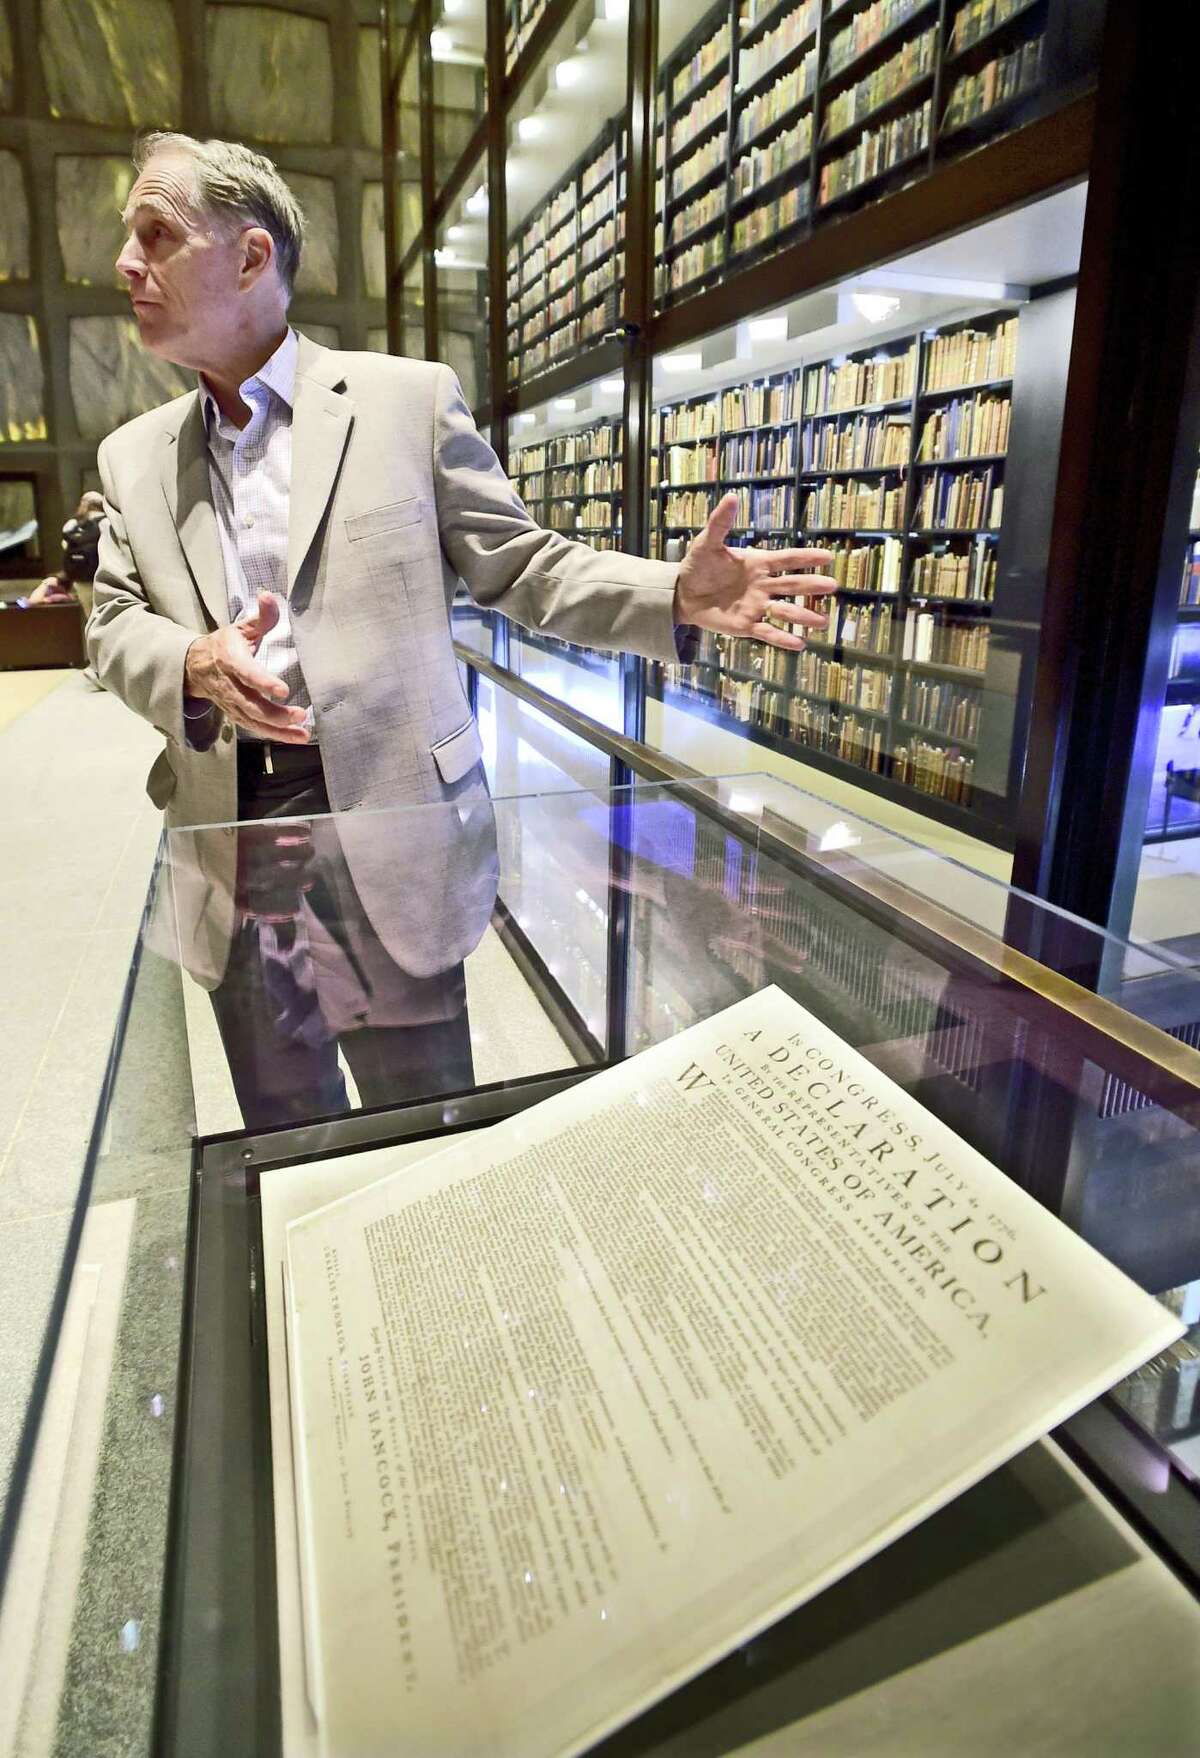 (Peter Hvizdak / Hearst Connecticut Media) New Haven, Connecticut: June 28, 2017. George Miles, the William Robertson Coe Curator of Yale Collections of Western Americana at the Beinecke Rare Book & Manuscript Library at Yale University in New Haven with a first printed issue of the Declaration of Independence by John Dunlap in Philadelphia on July 4, 1776 at the library.